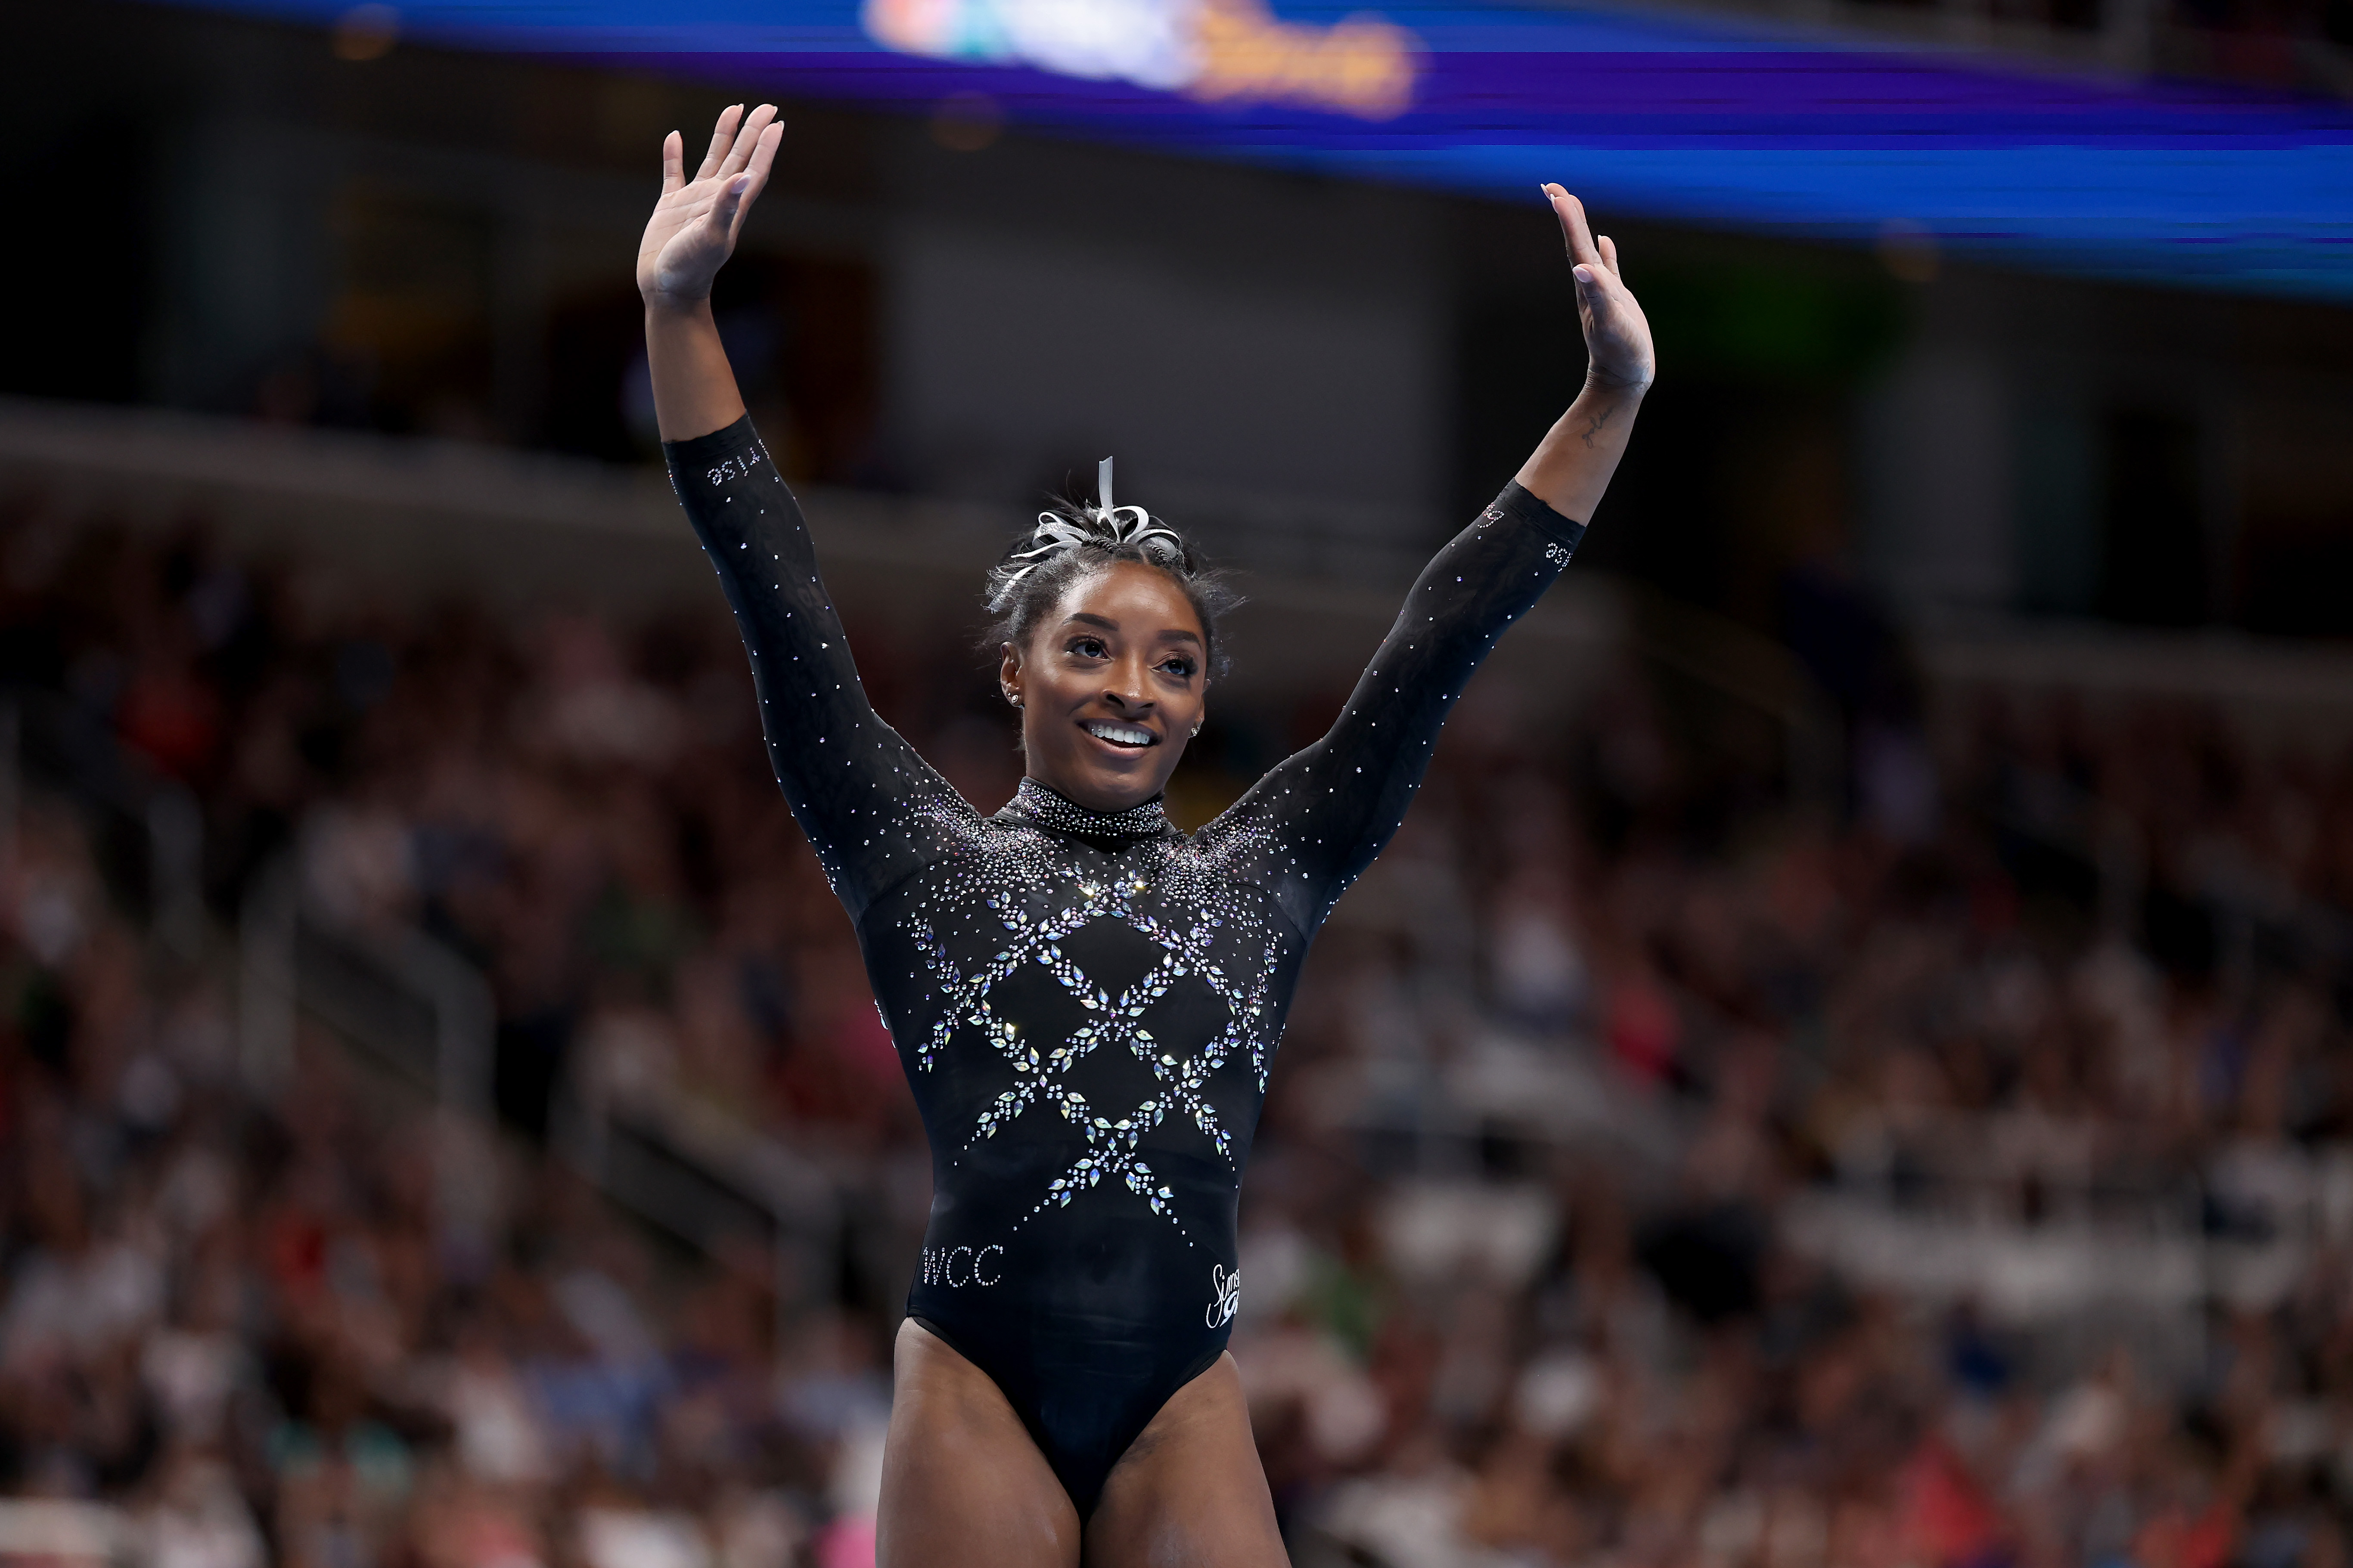 Make it 23 titles: Unstoppable Biles wraps up world championships